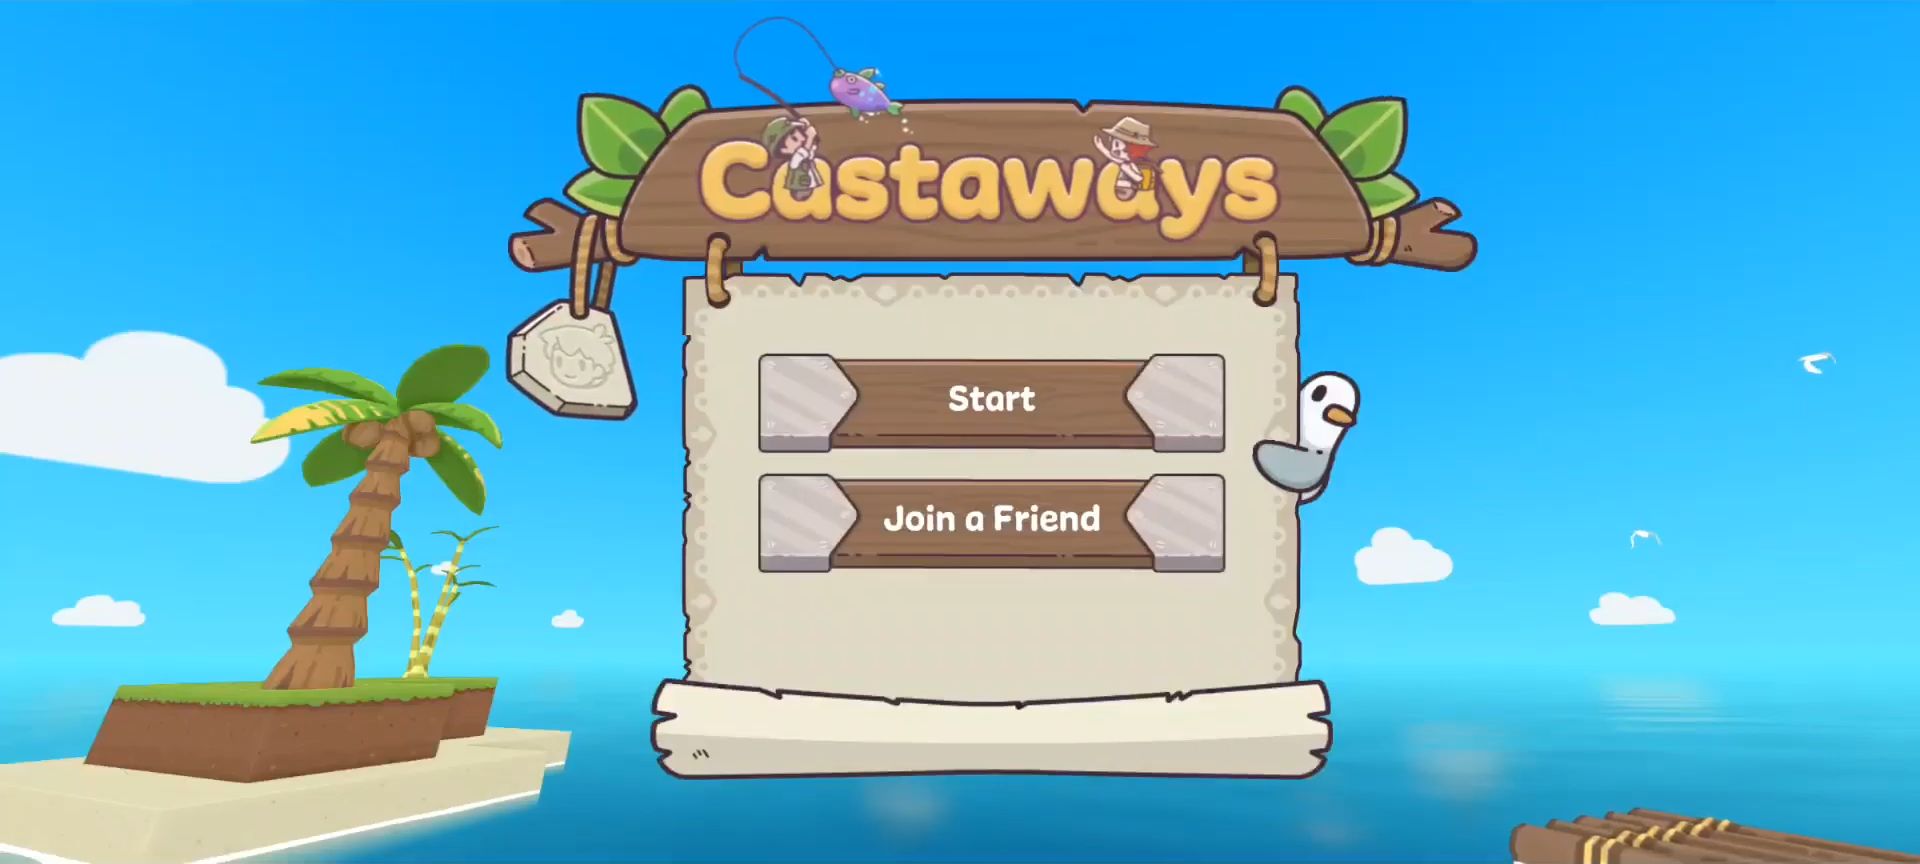 Full version of Android Sandbox game apk Castaways for tablet and phone.